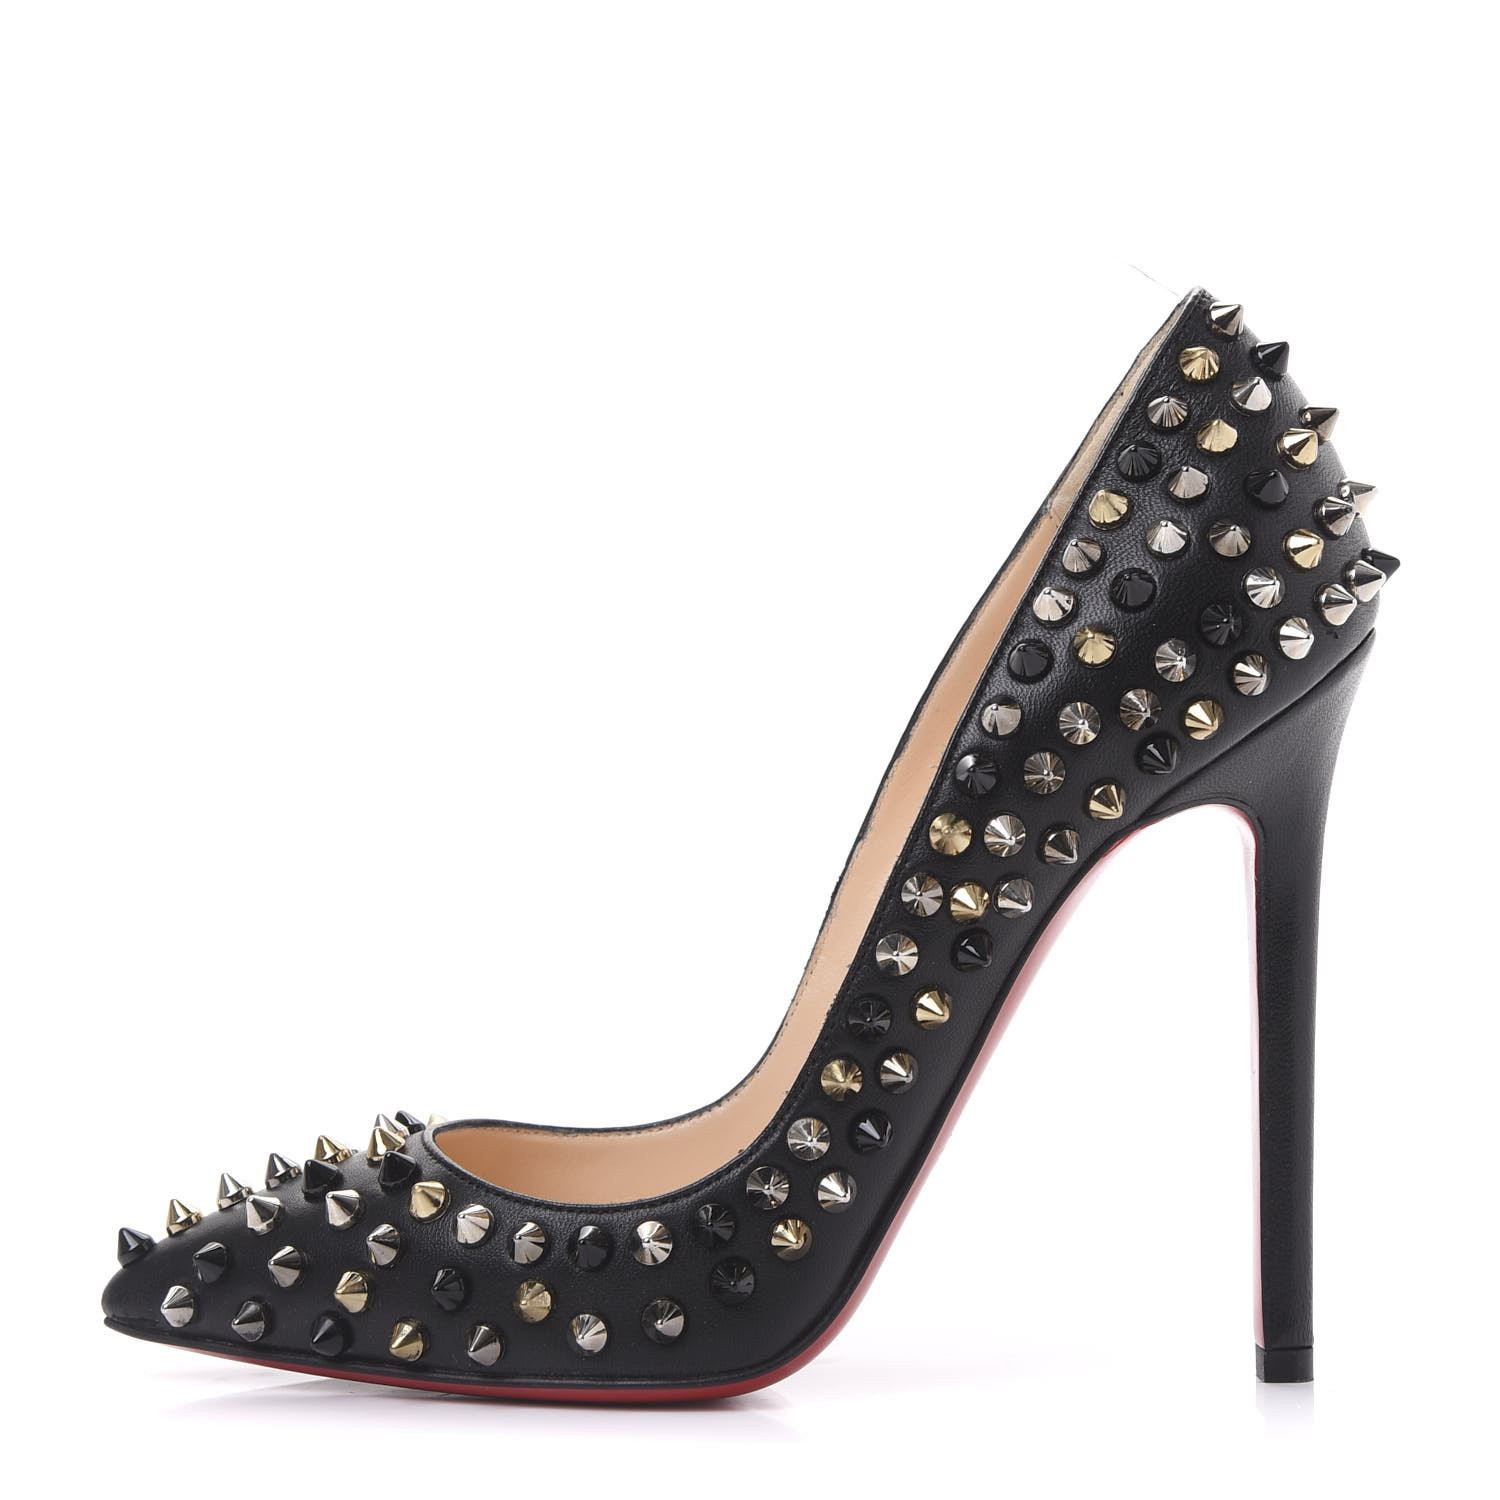 CHRISTIAN LOUBOUTIN Nappa Pigalle Spikes 120 Pumps 35 Black 601615 ...